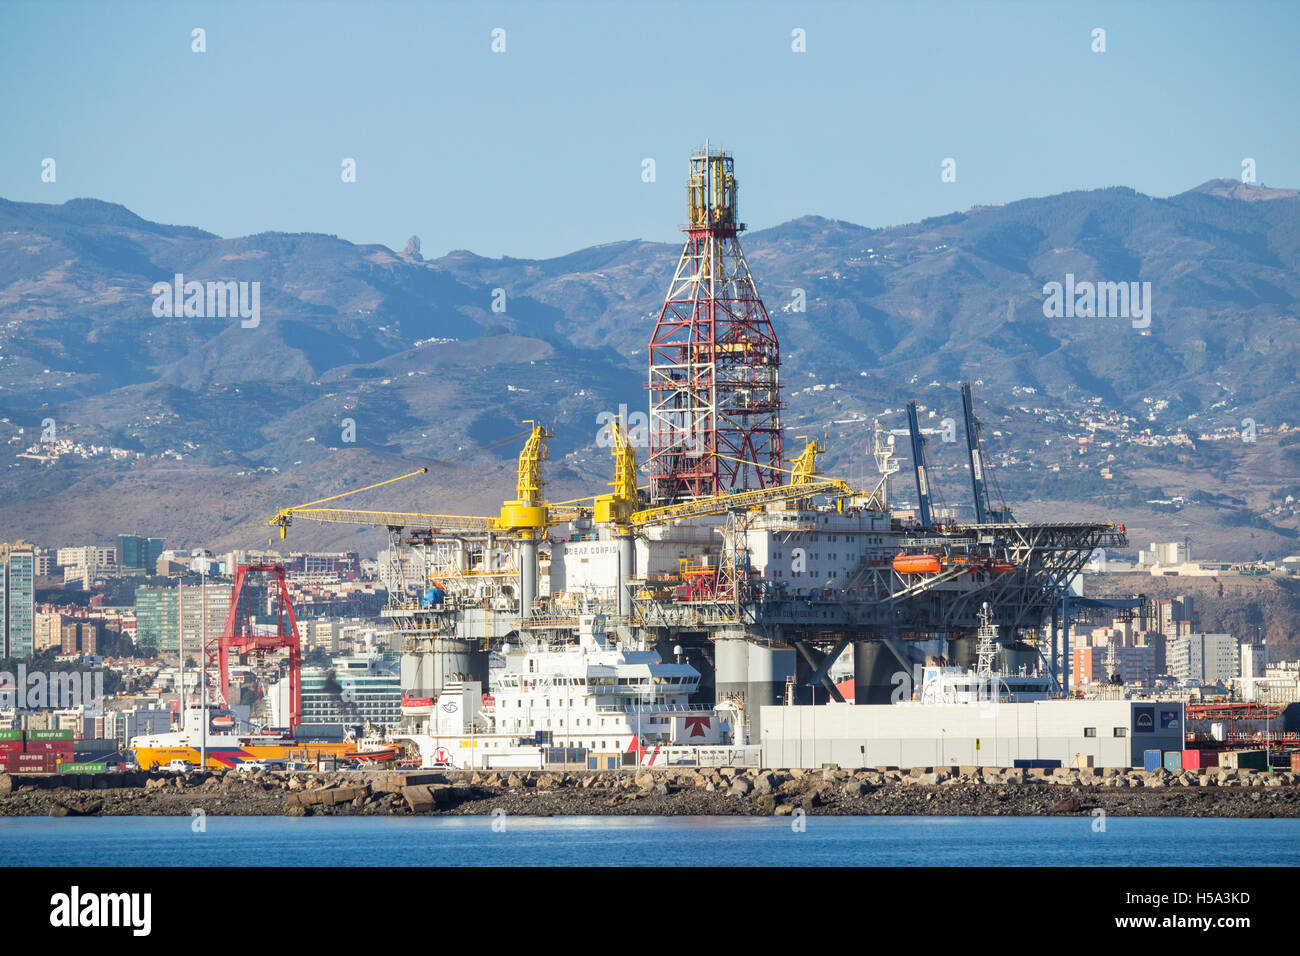 Oil rigs in Las Palmas port (Puerto de La Luz) on Gran Canaria with city and mountain in background. Canary Islands, Spain. Stock Photo